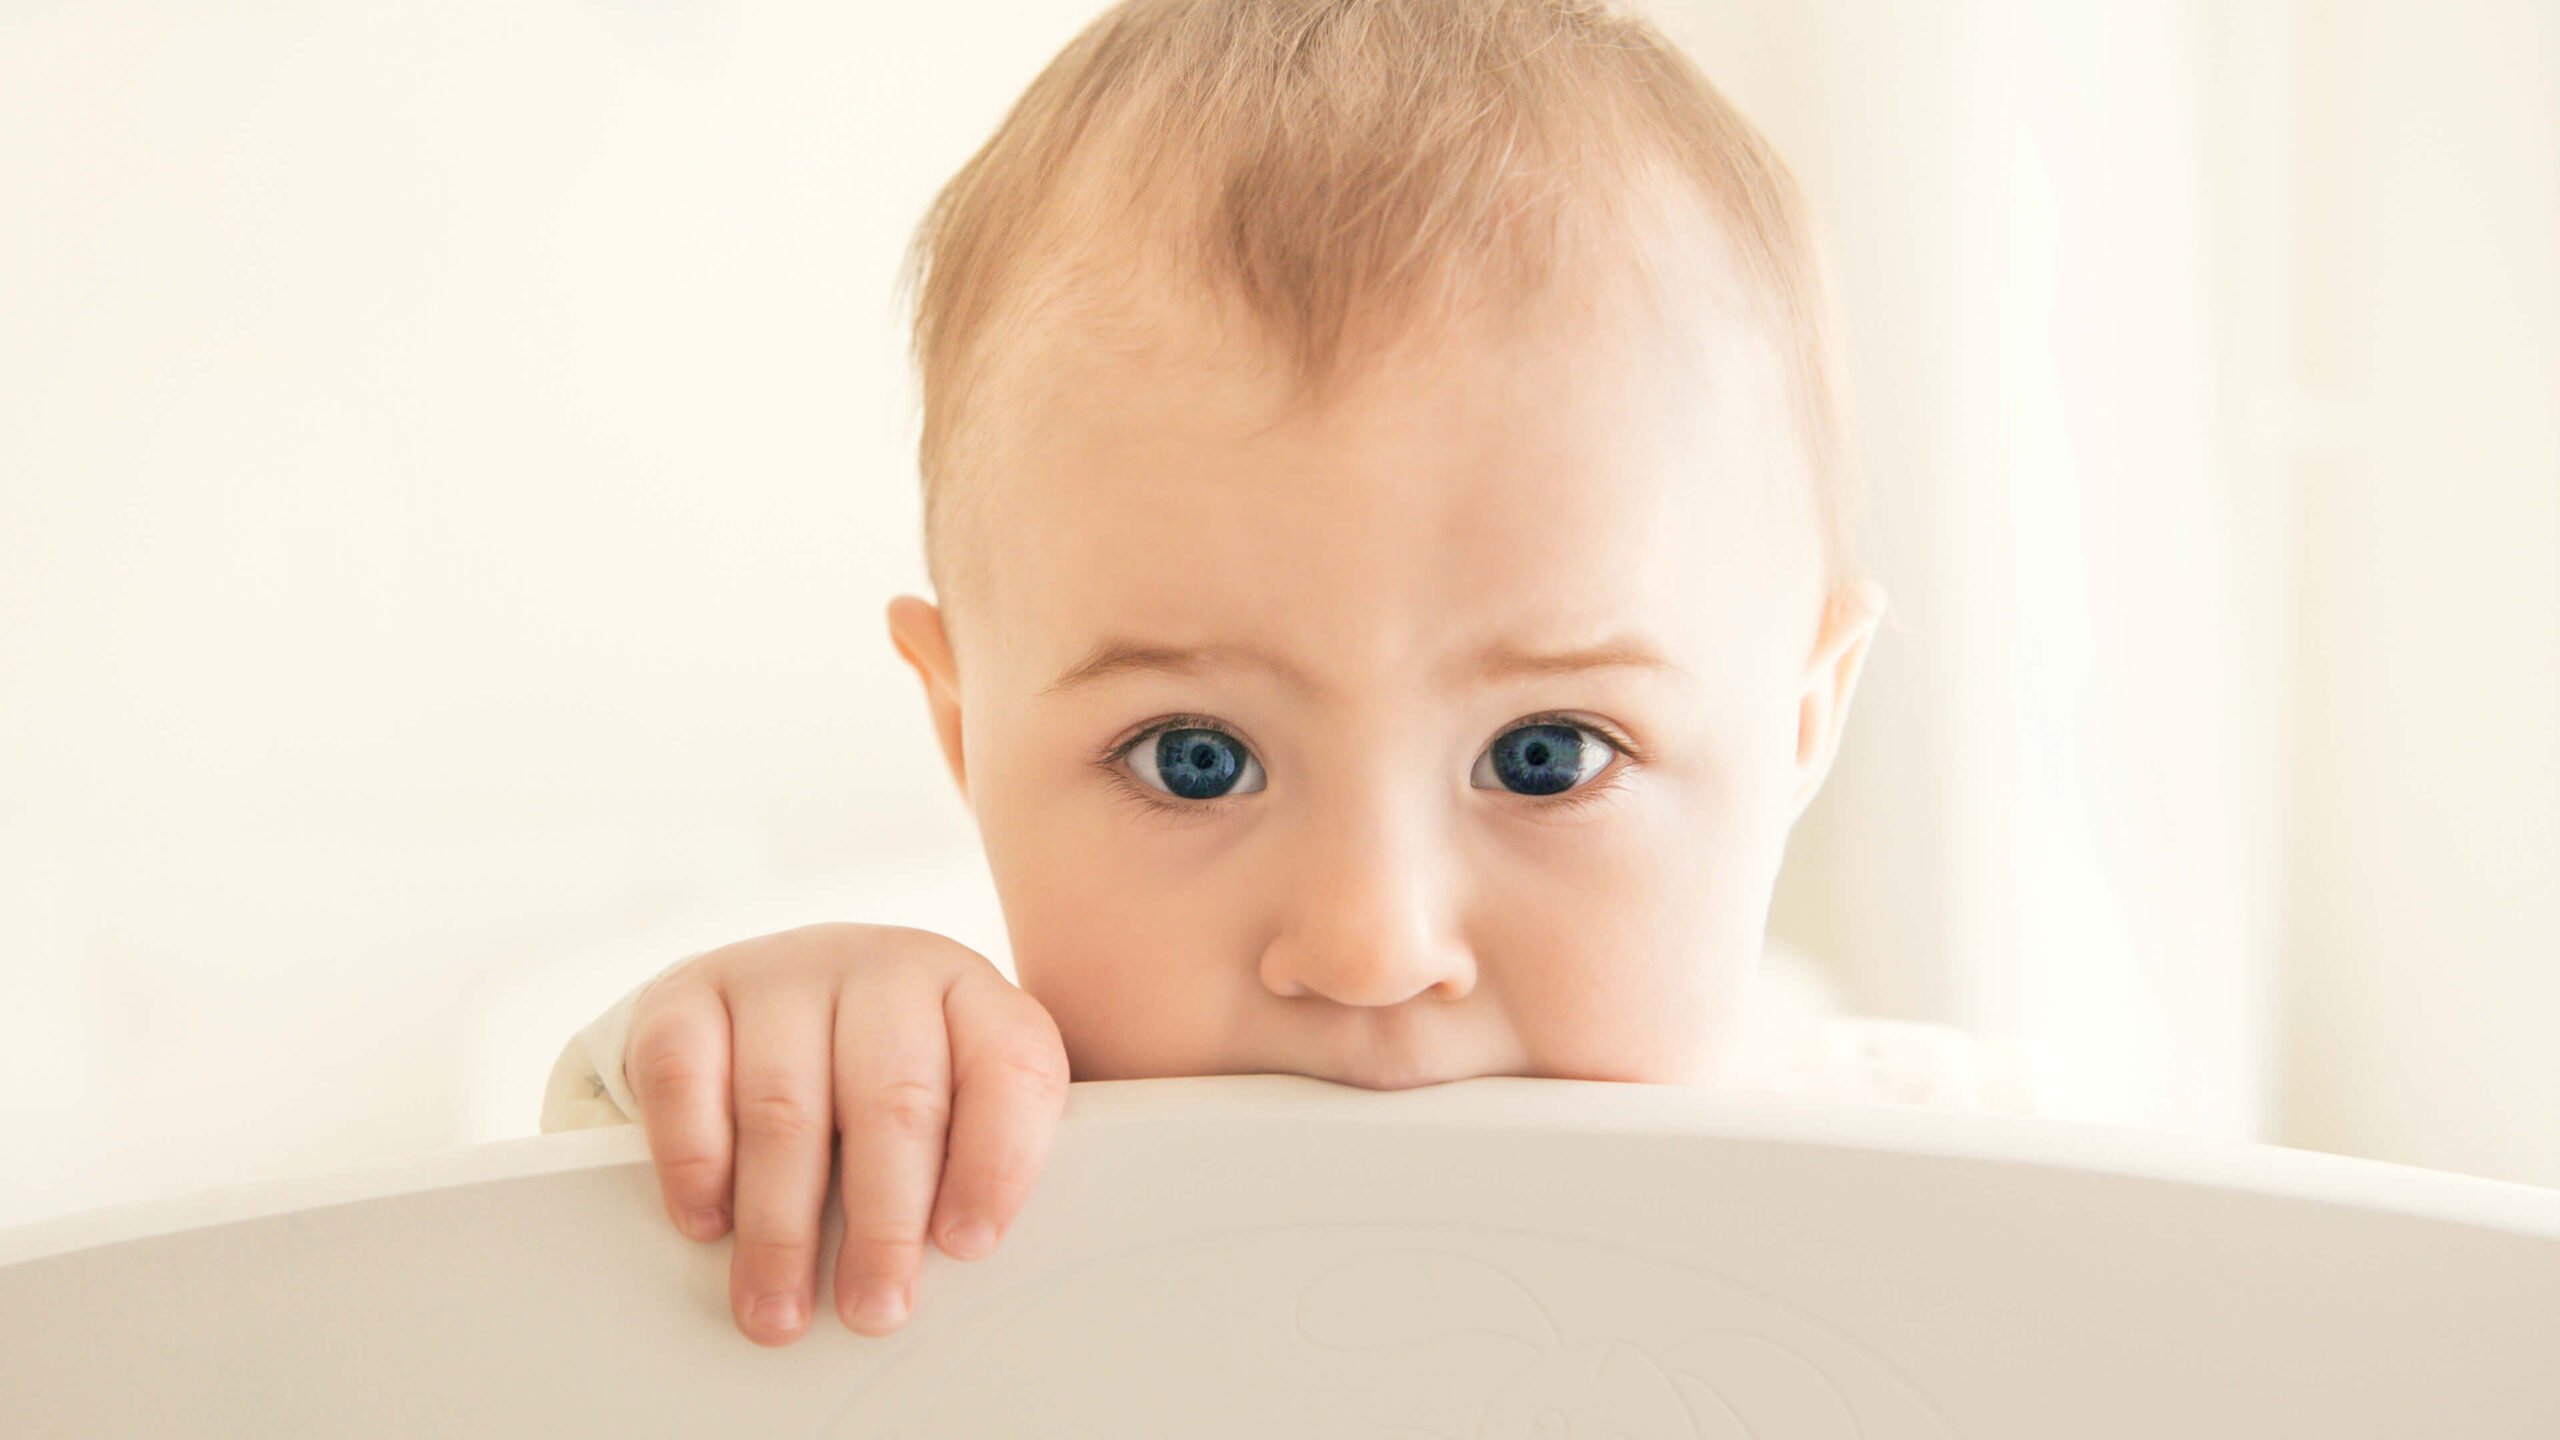 Teething Symptoms 7 Signs Your Baby is Teething scaled 1